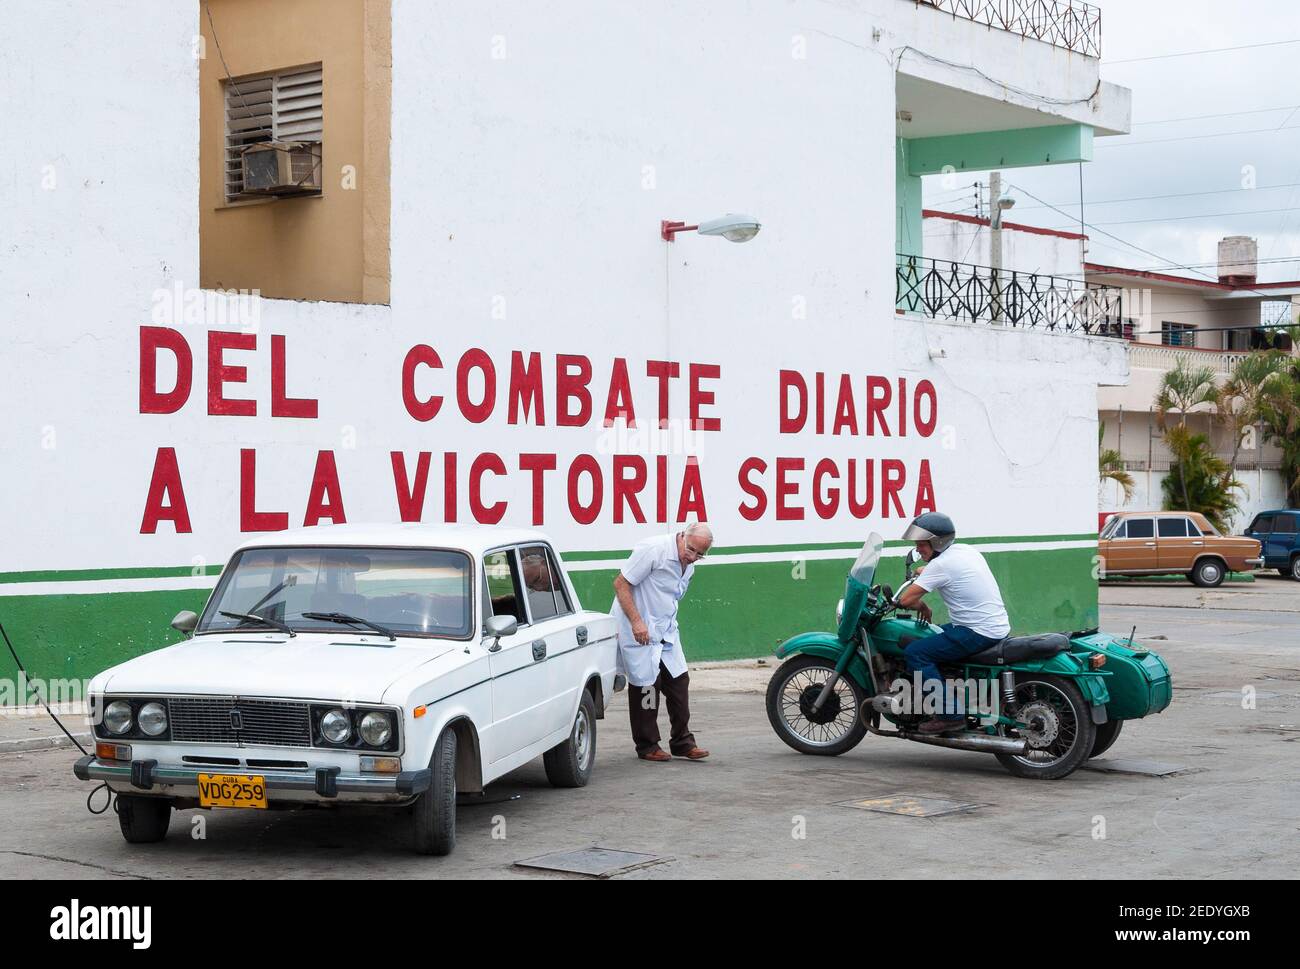 A doctor inflating Lada tires or wheels. Two men see the old soviet car and motorcycles in the streets of the Cuban city. The inscriptio Stock Photo